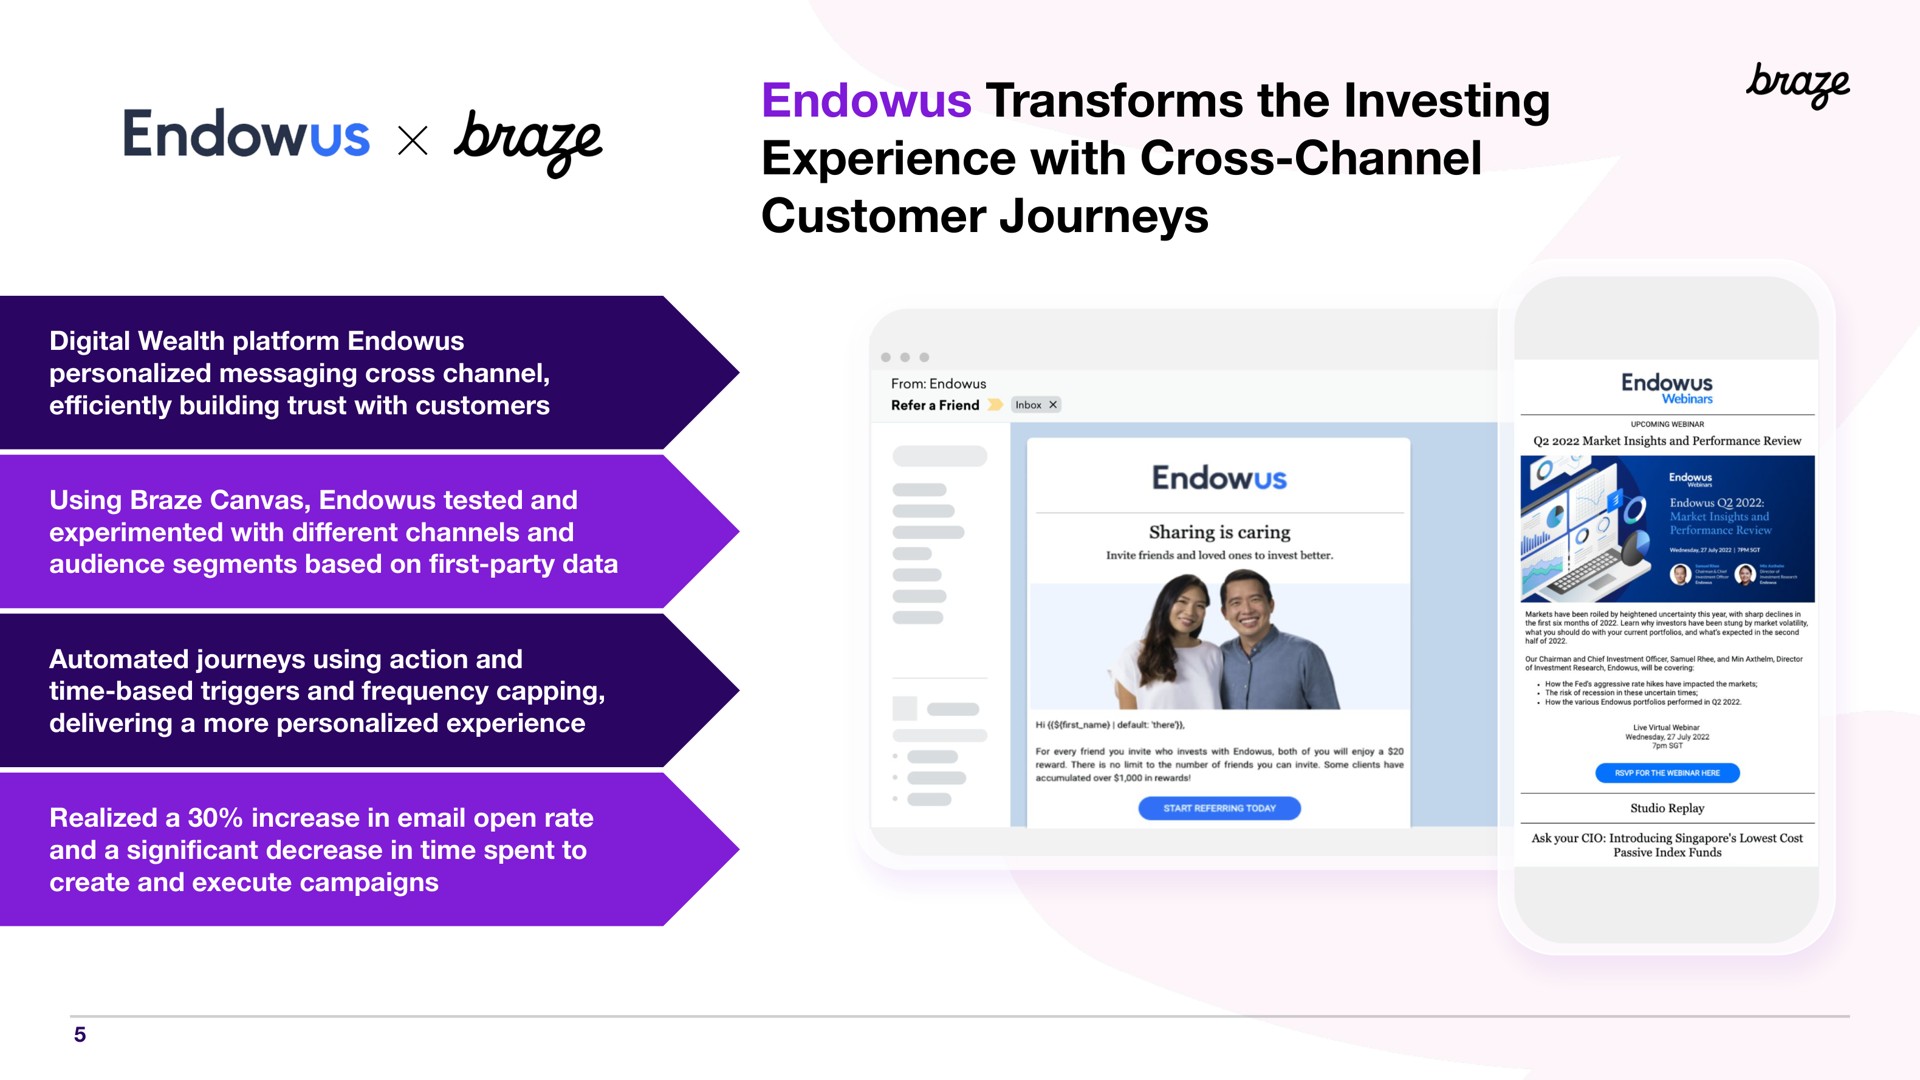 transforms the investing experience with cross channel customer journeys braze | Braze